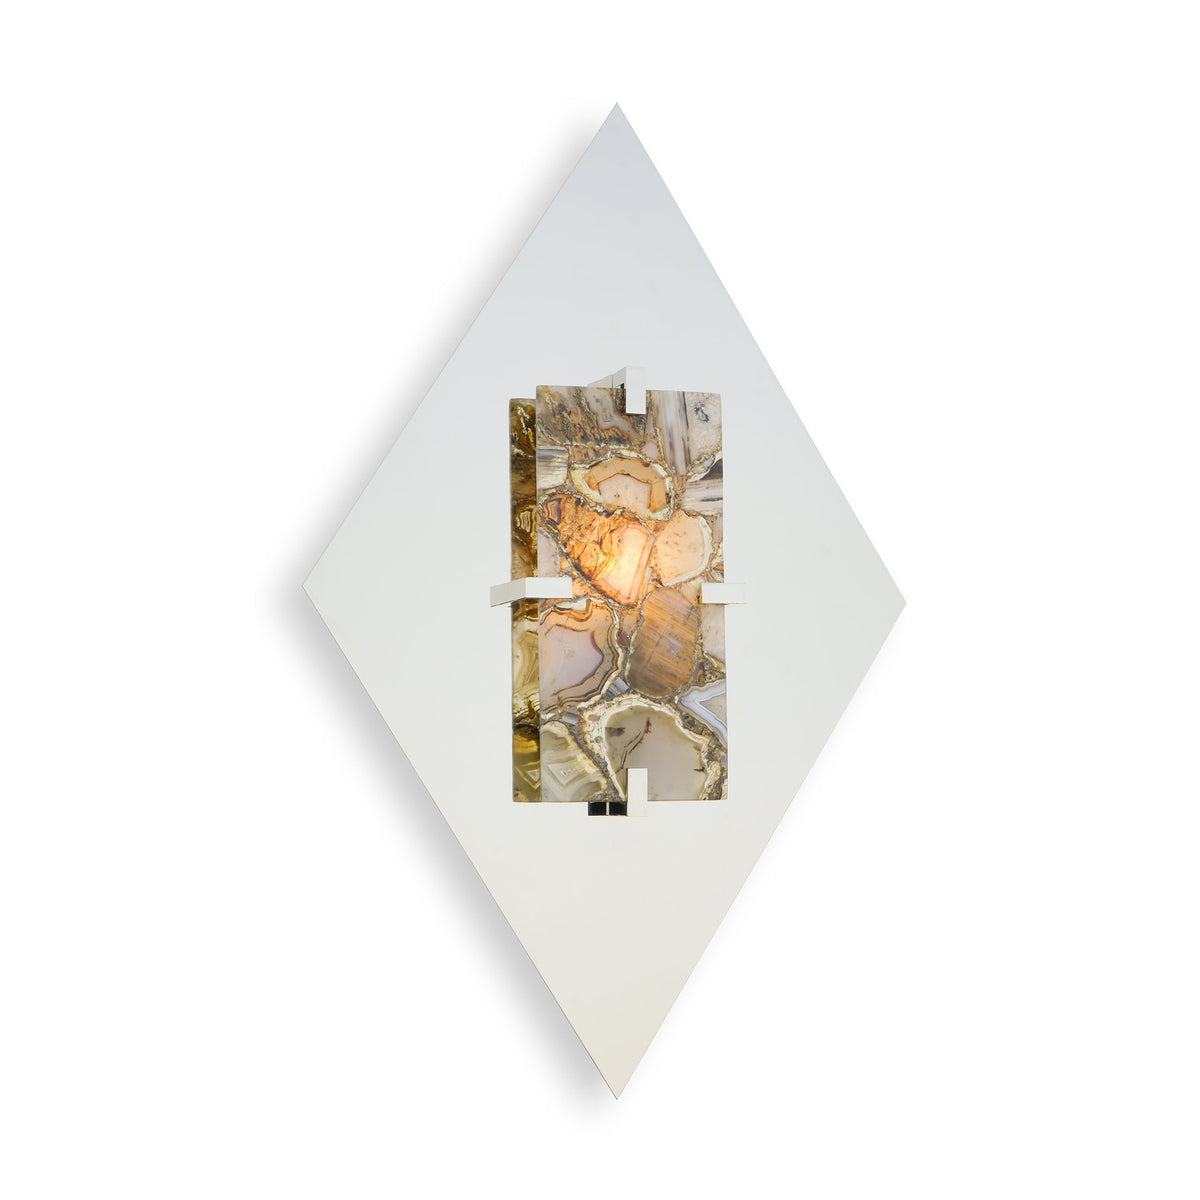 RETRO WALL SCONCE - LARGE NICKEL